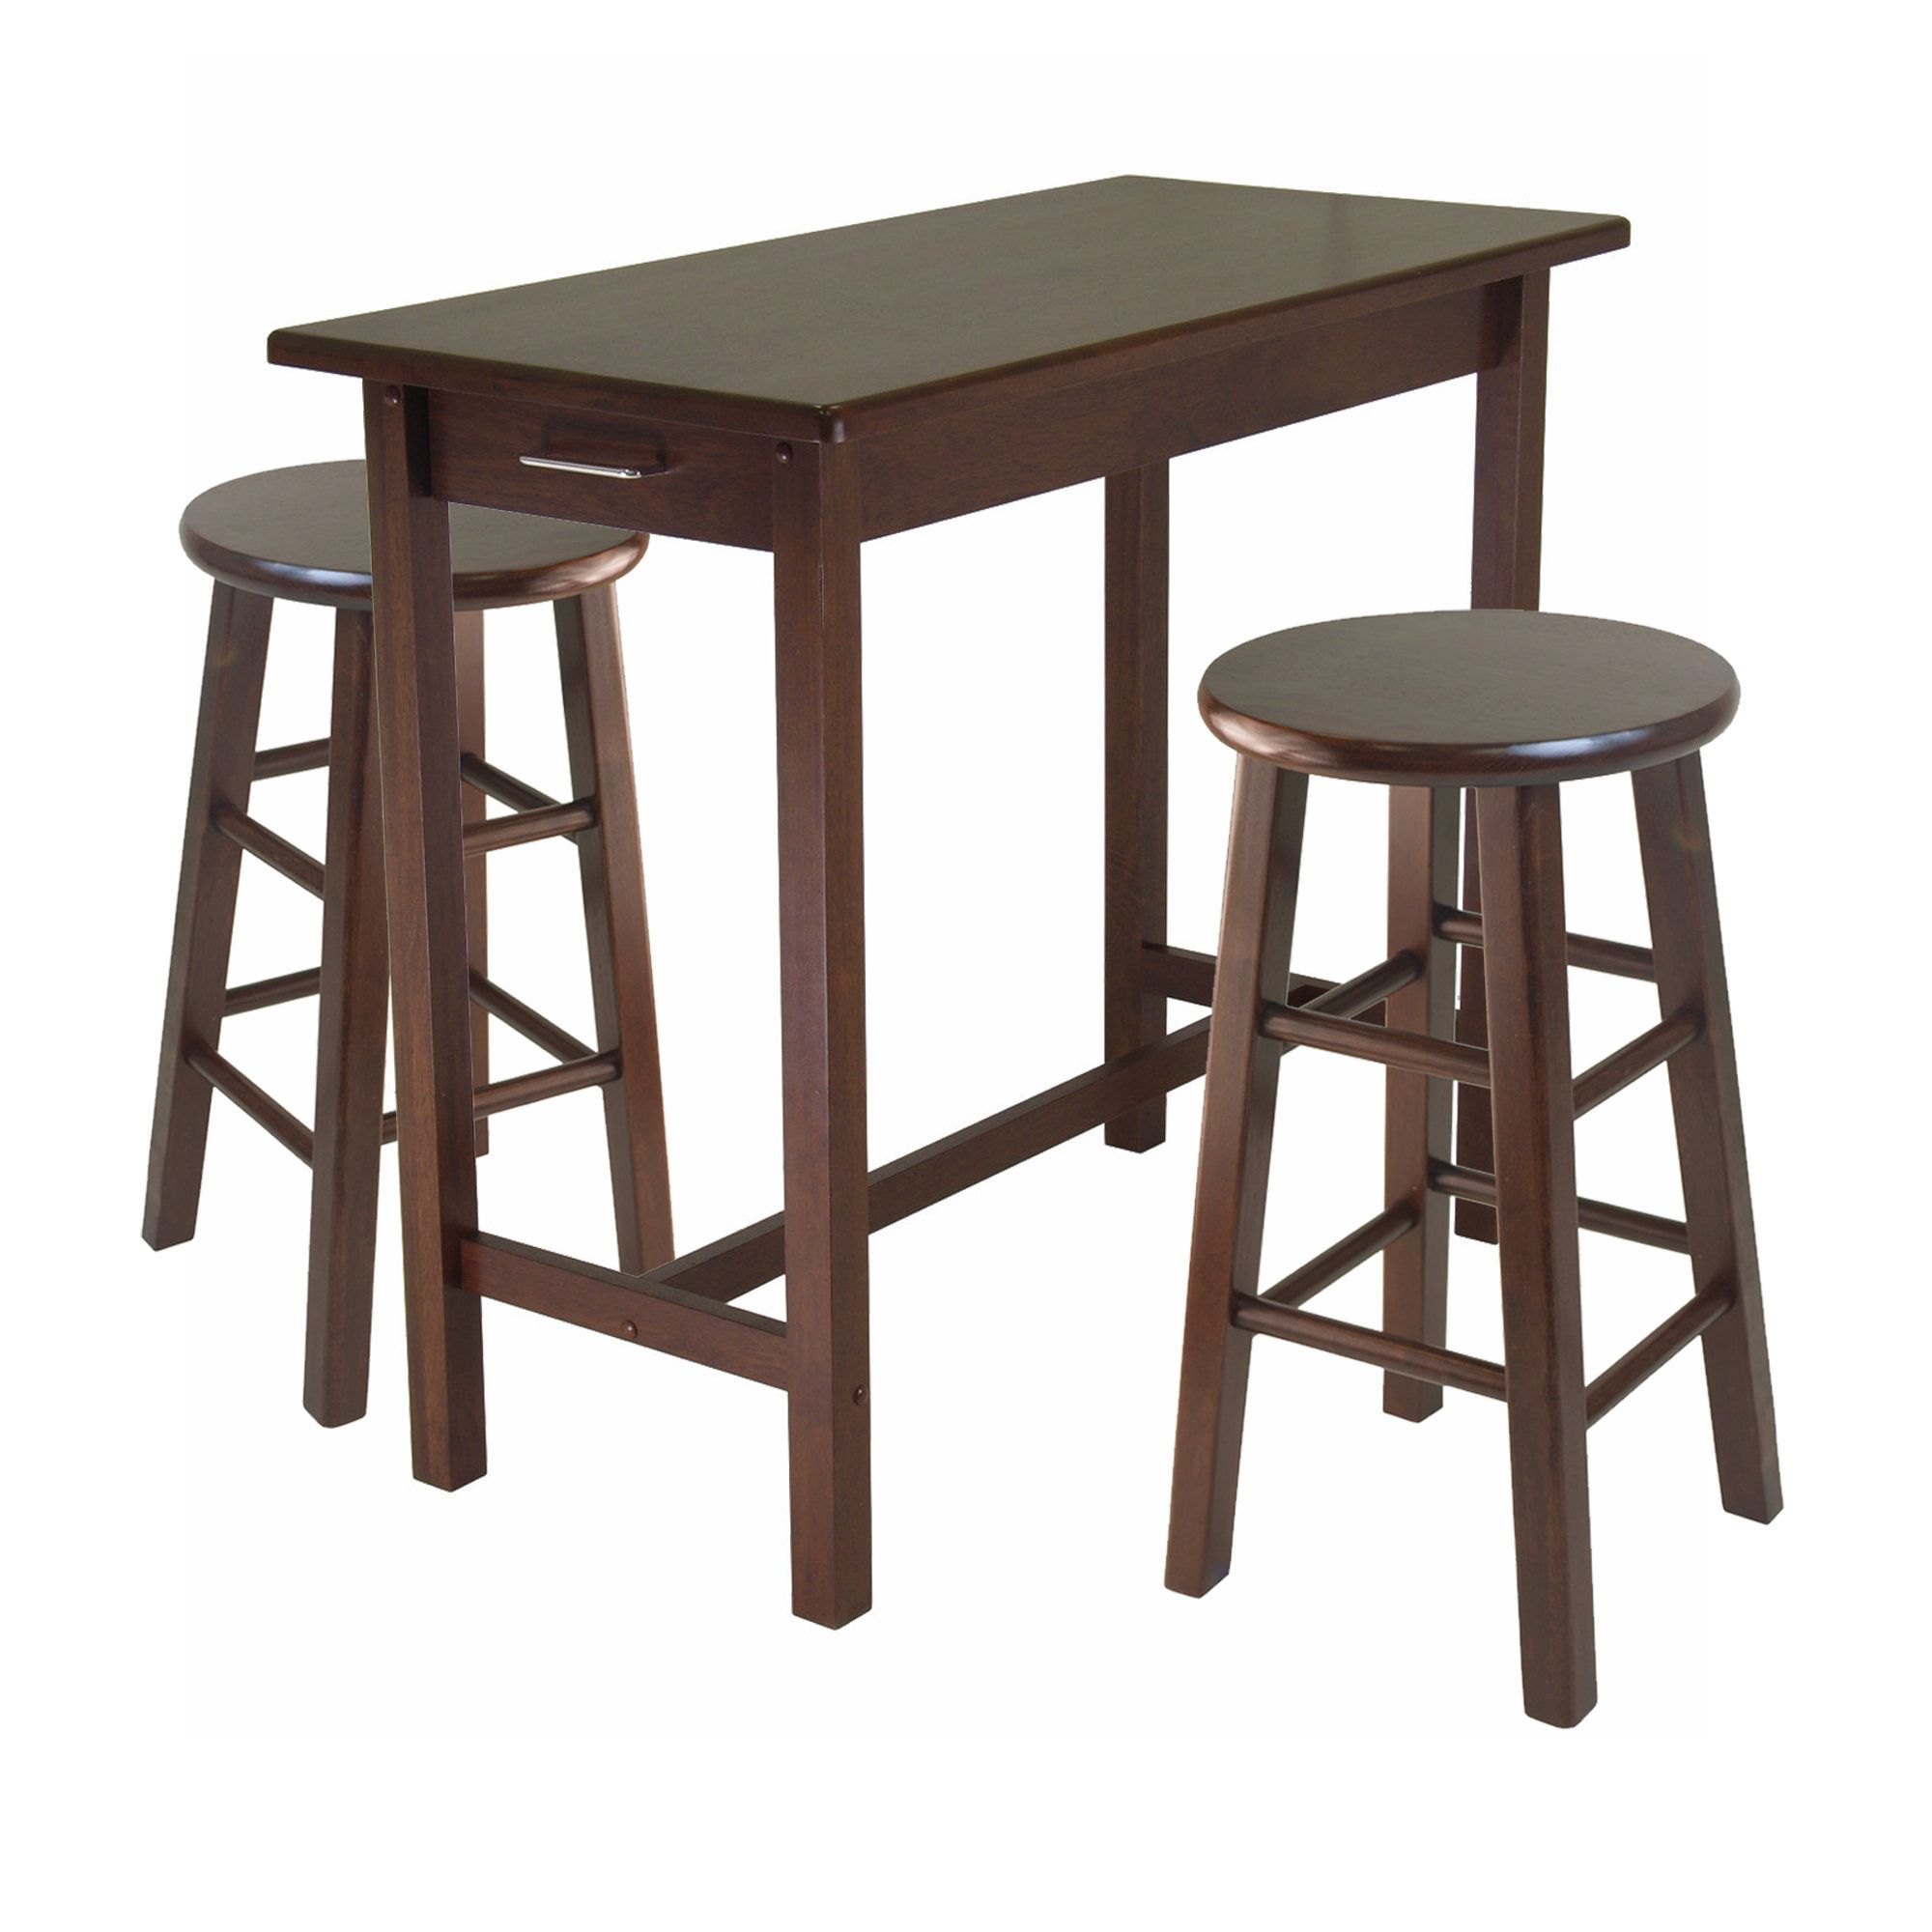 Wayfair Intended For Miskell 3 Piece Dining Sets (View 8 of 20)